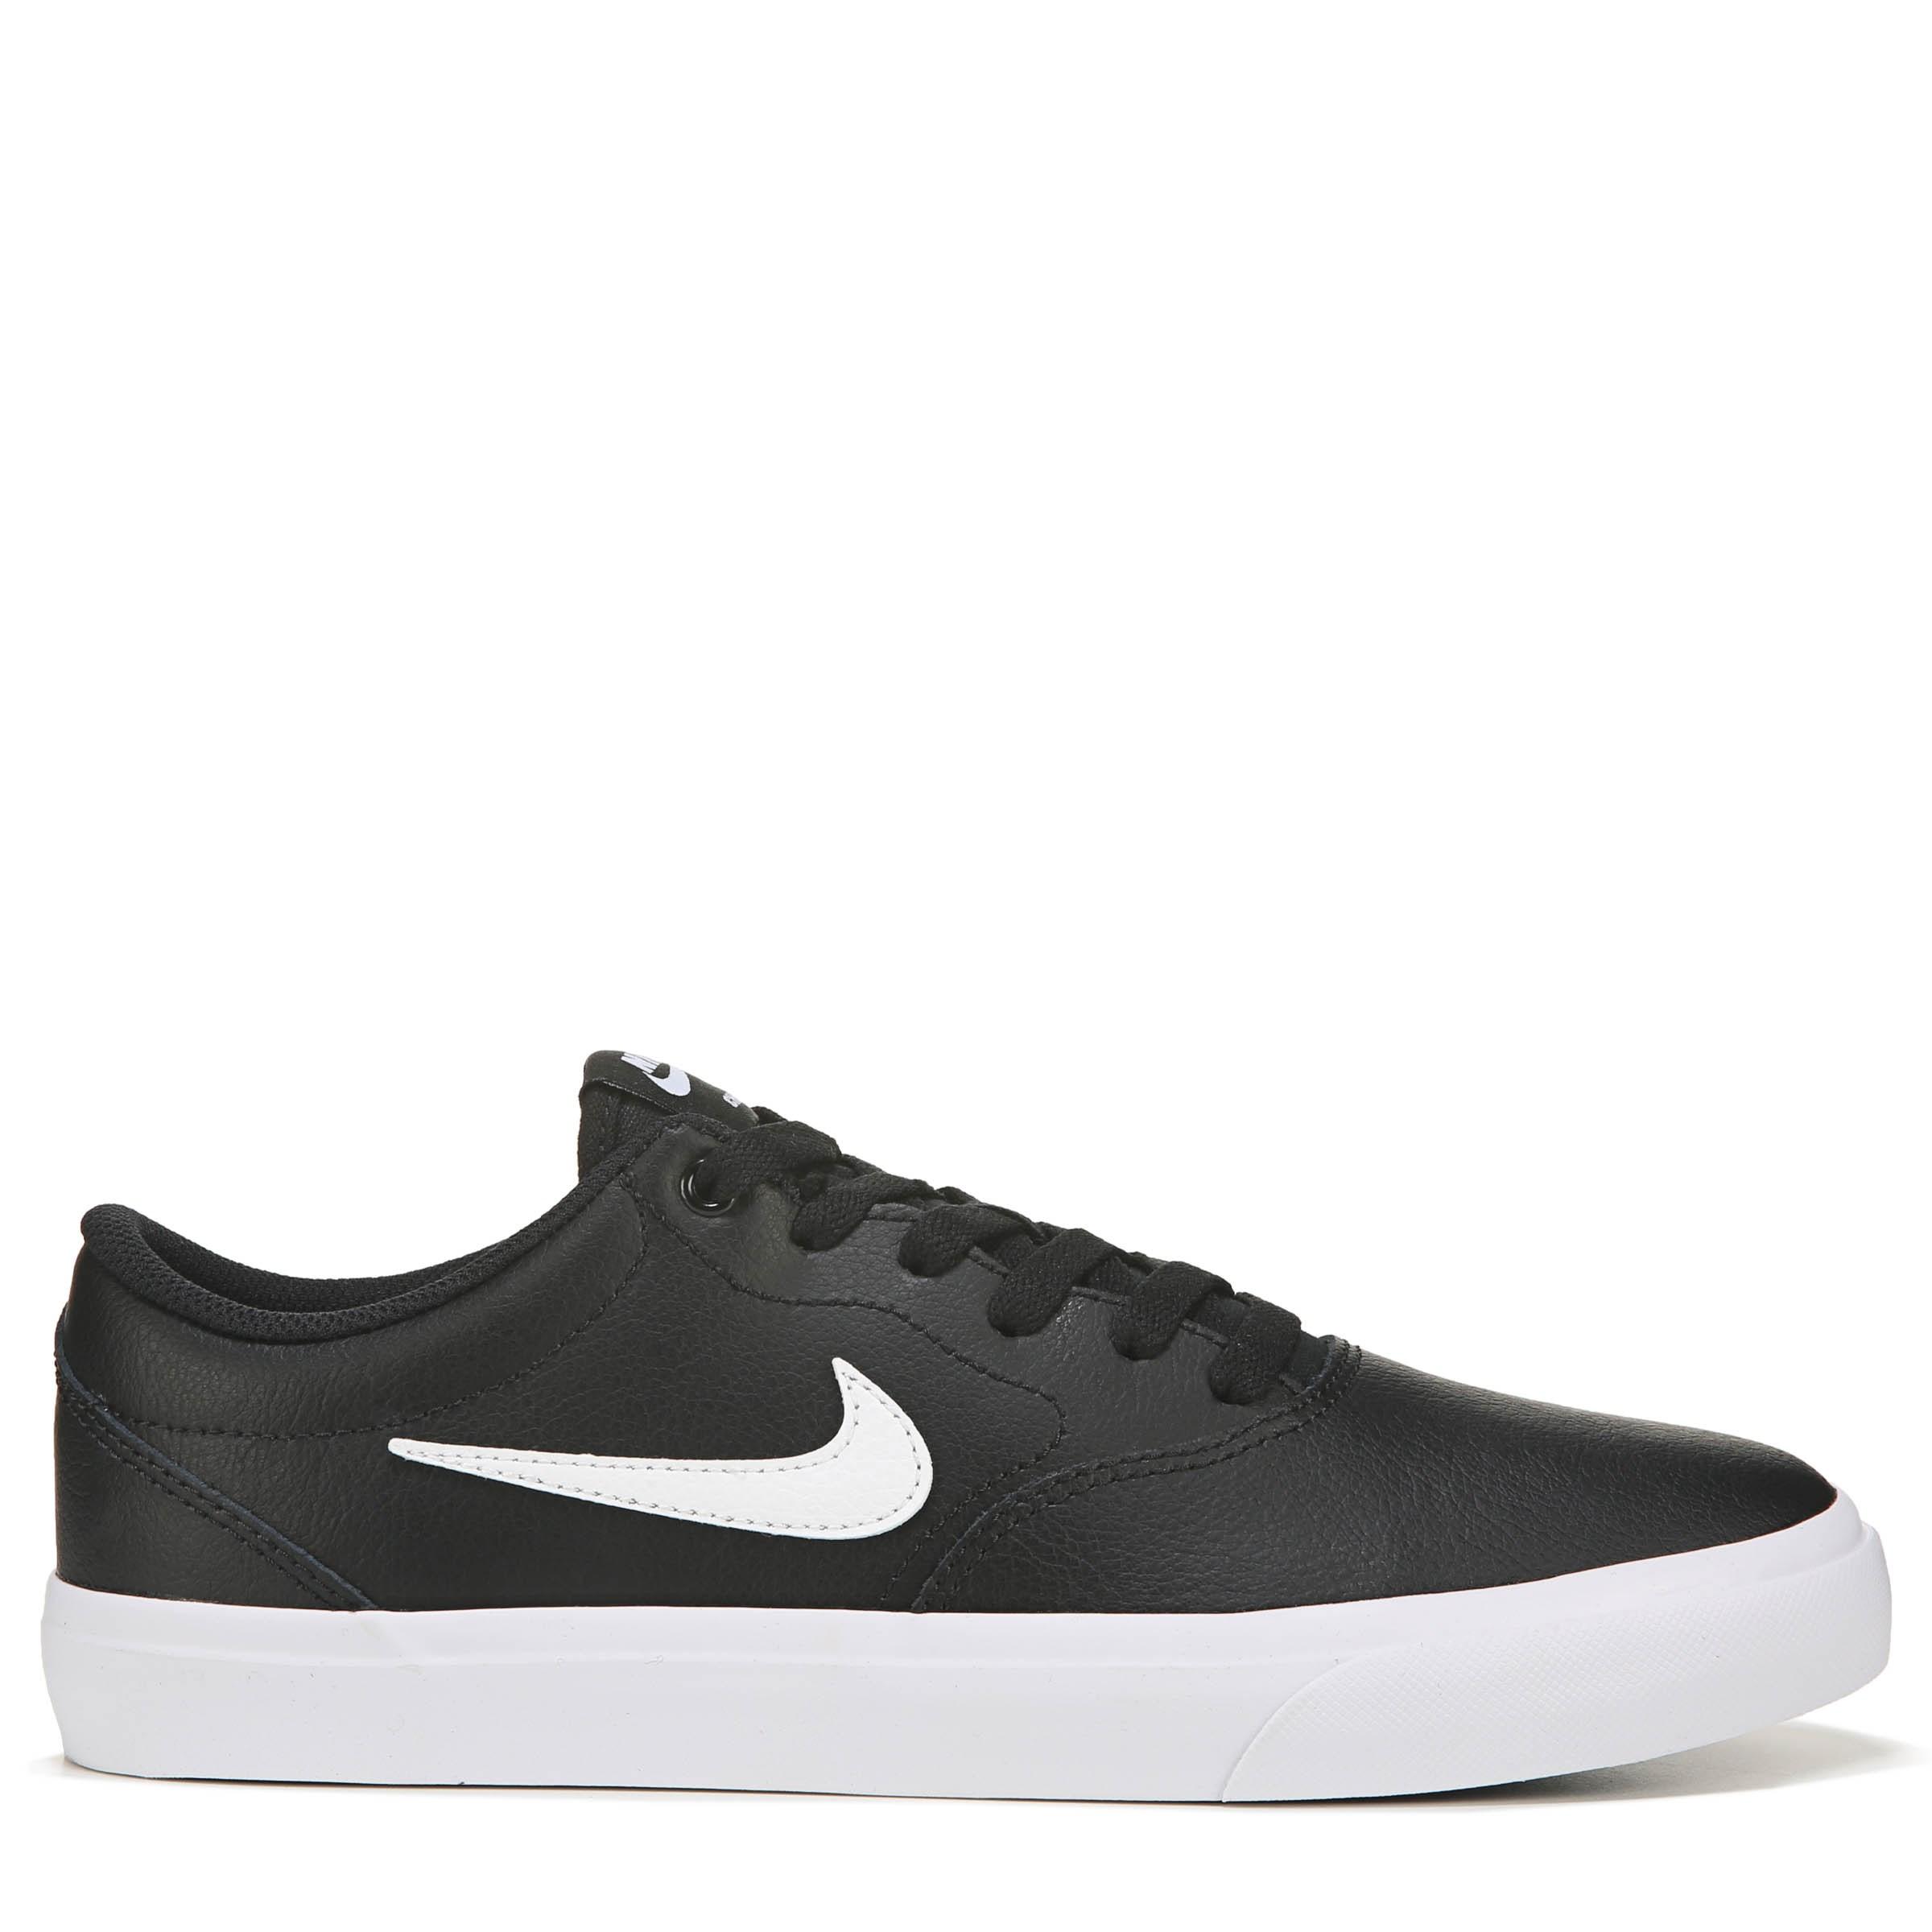 Nike Sb Charge Leather Skate Shoes in Black/White (Black) for Men - Lyst